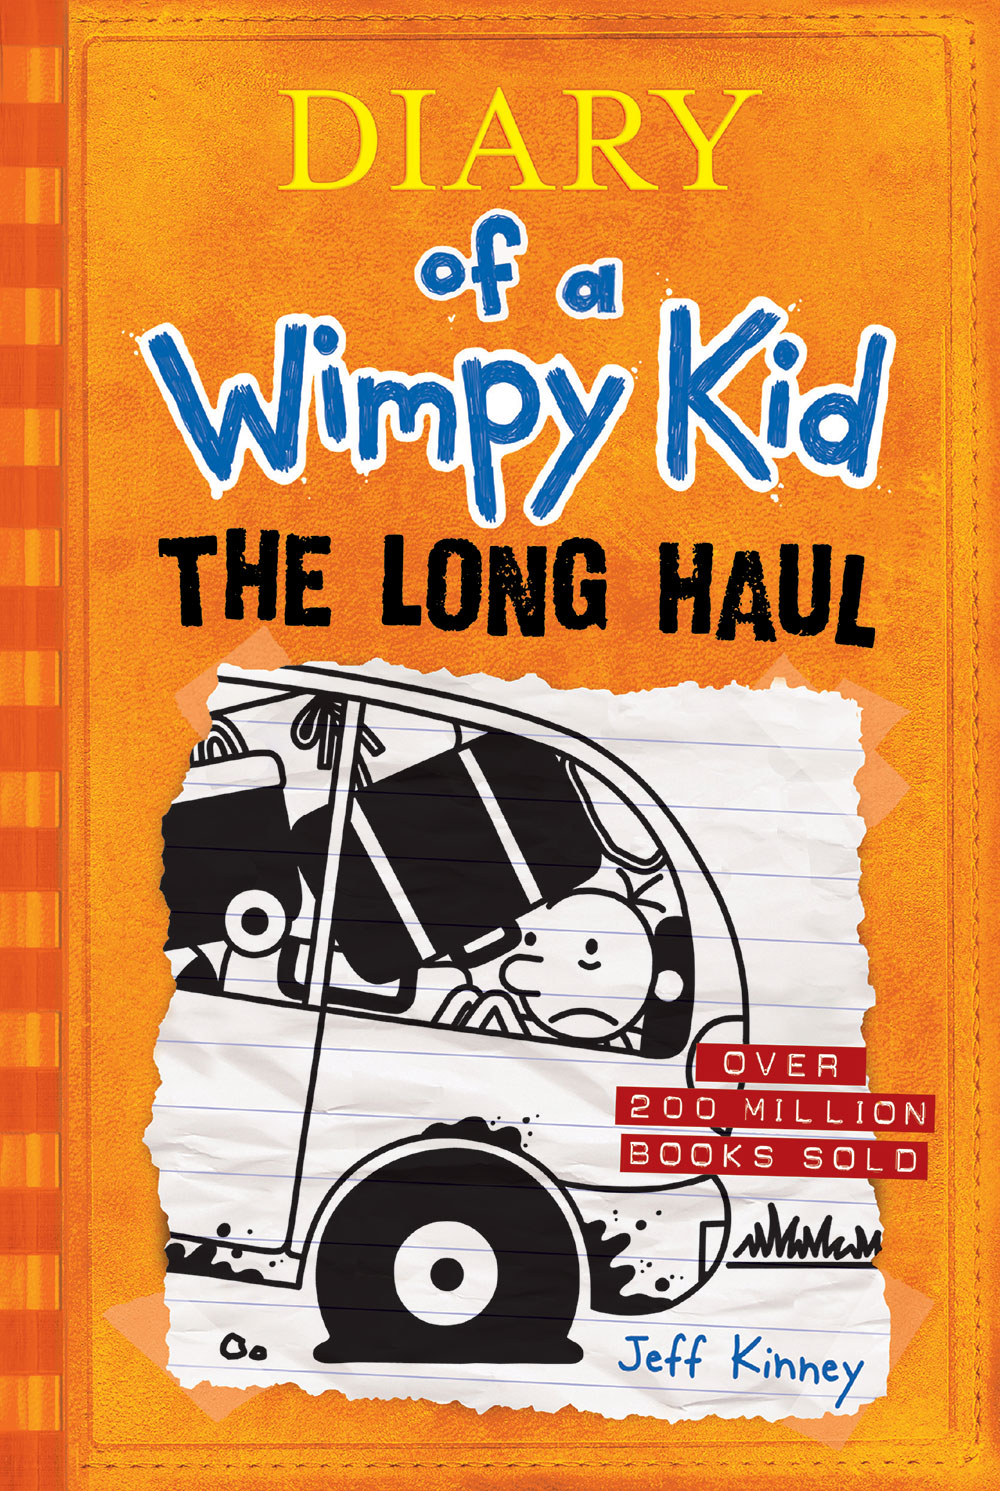 Diary of a Wimpy Kid T.09 - The Long Haul  | 9-12 years old